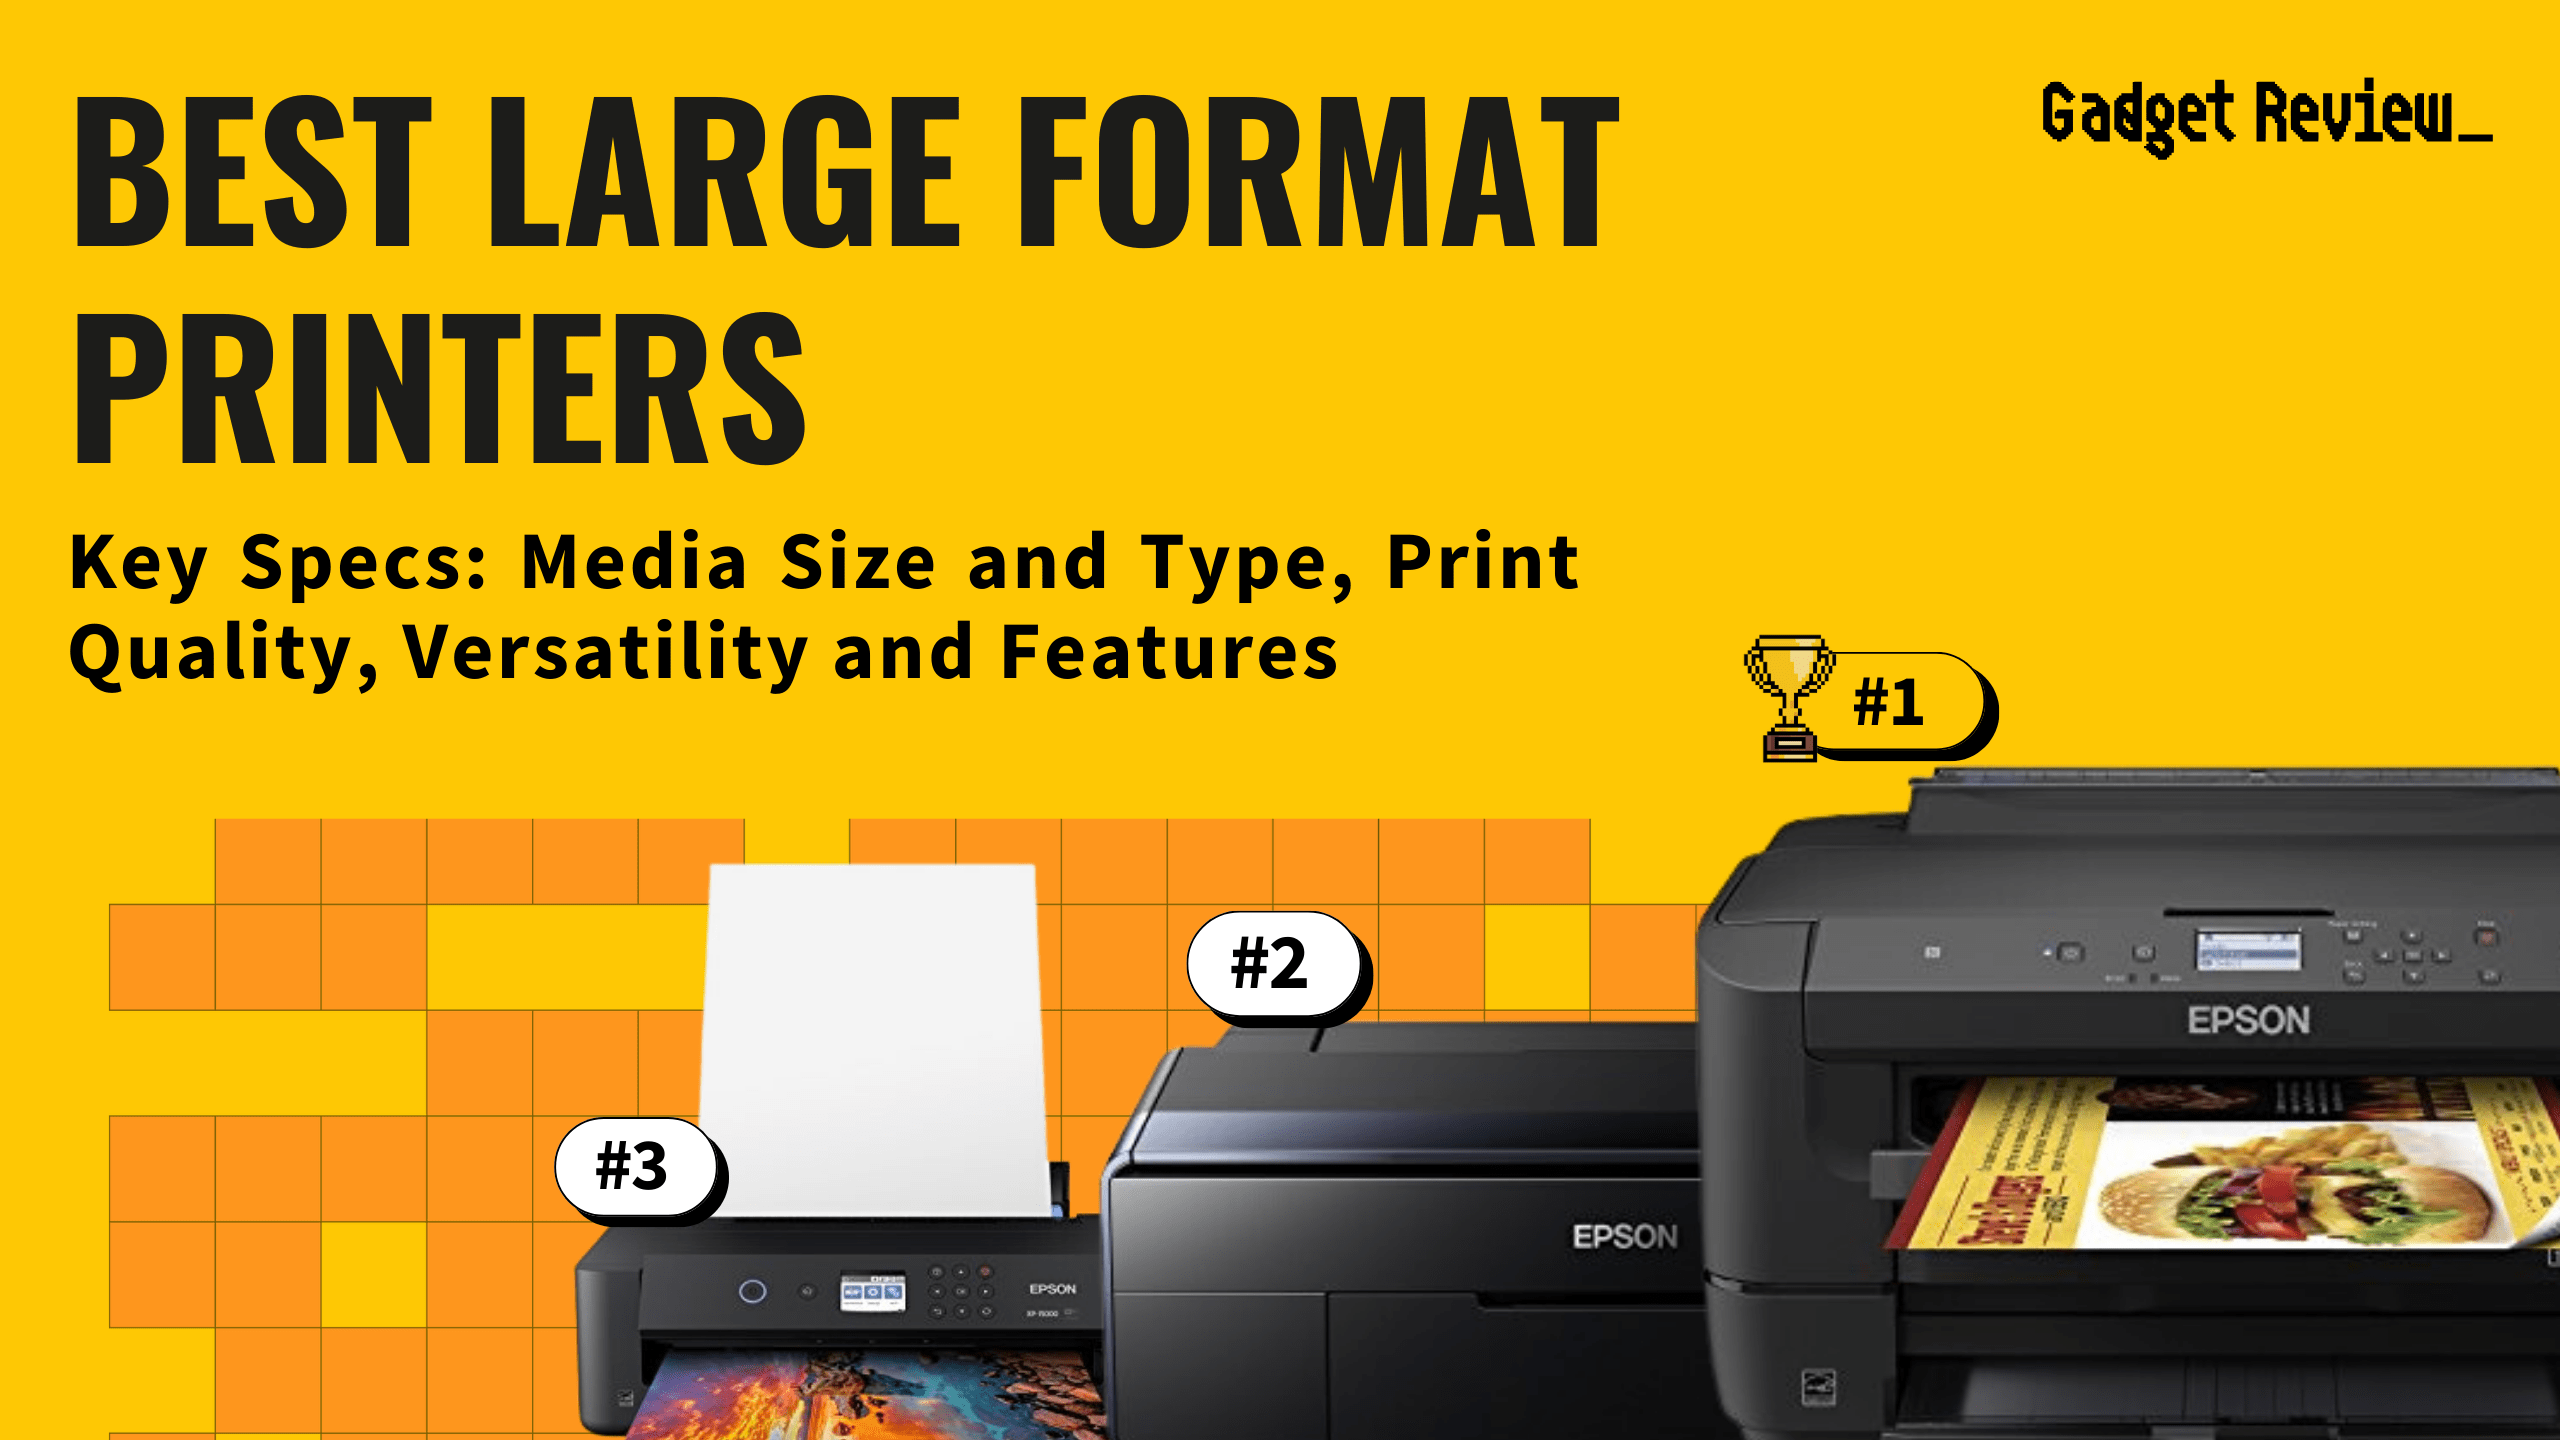 best large format printer featured image that shows the top three best printer models